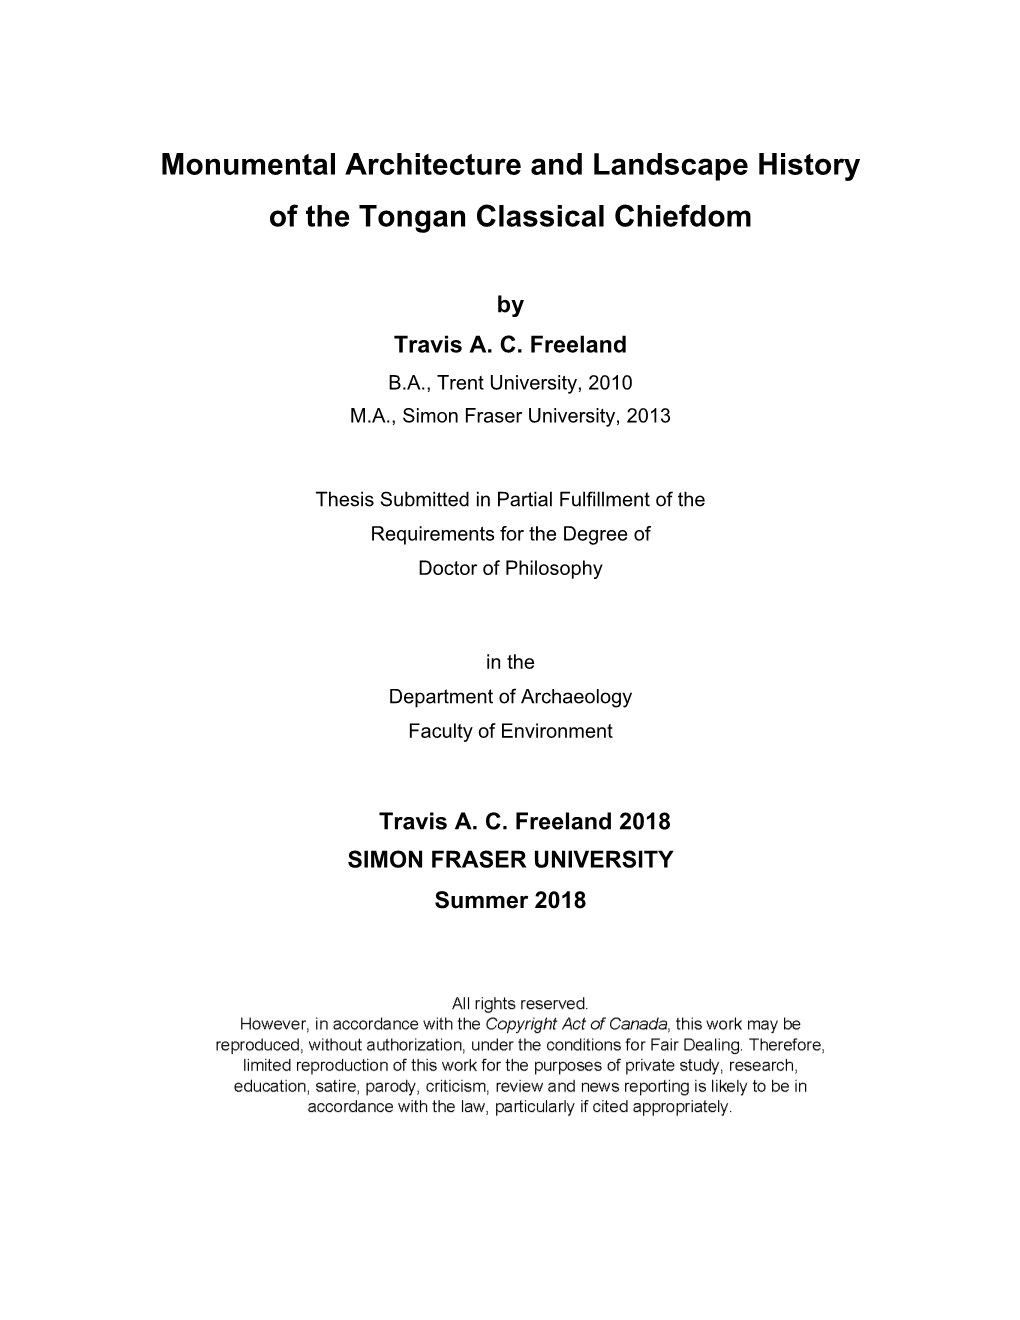 Monumental Architecture and Landscape History of the Tongan Classical Chiefdom